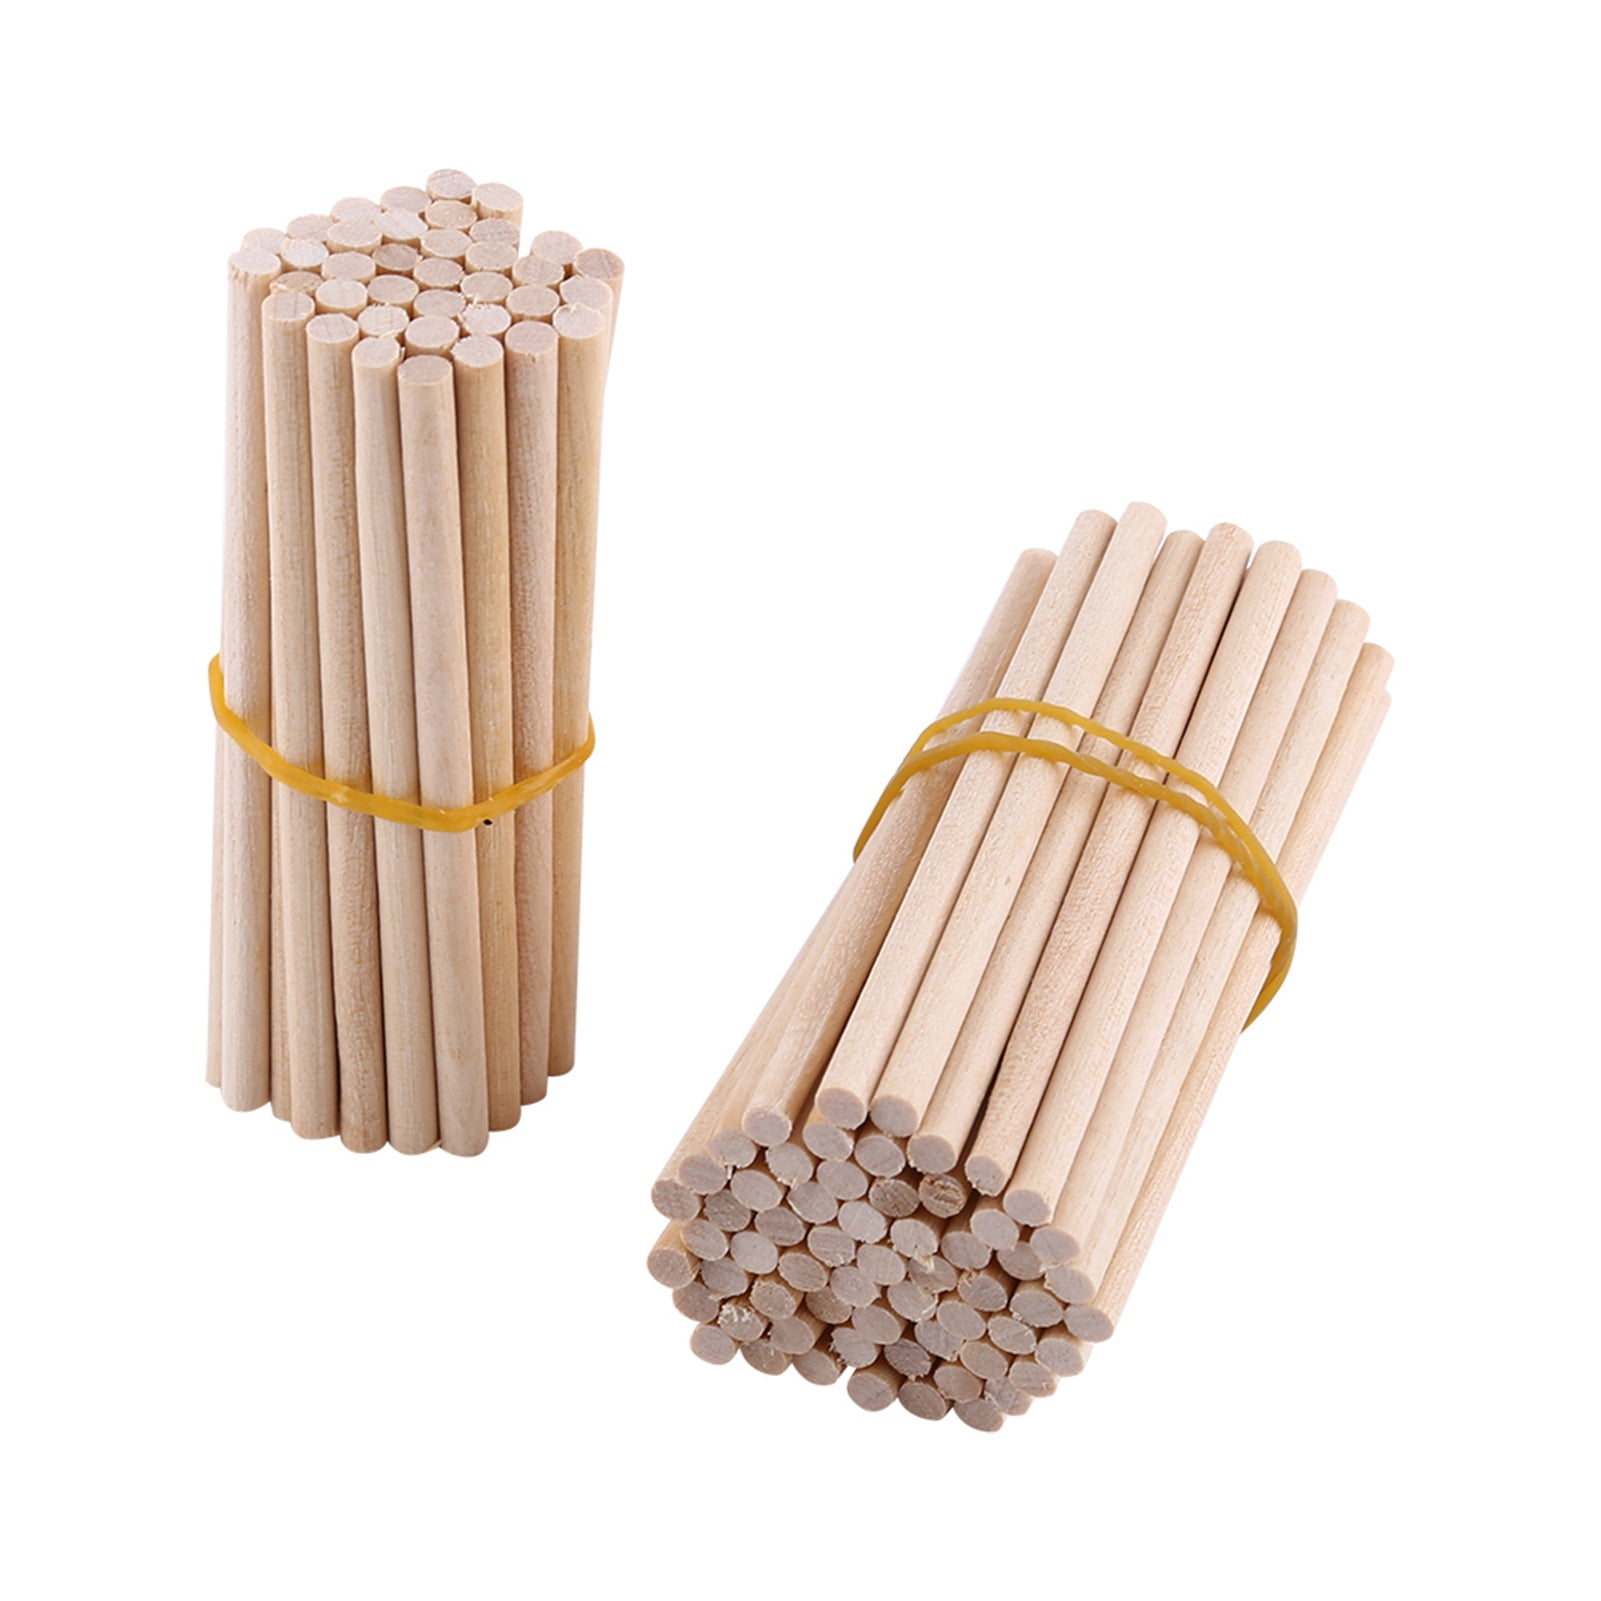 Sturdy Clean Healthy Natural Birchwood Bamboo Popsicle Sticks with